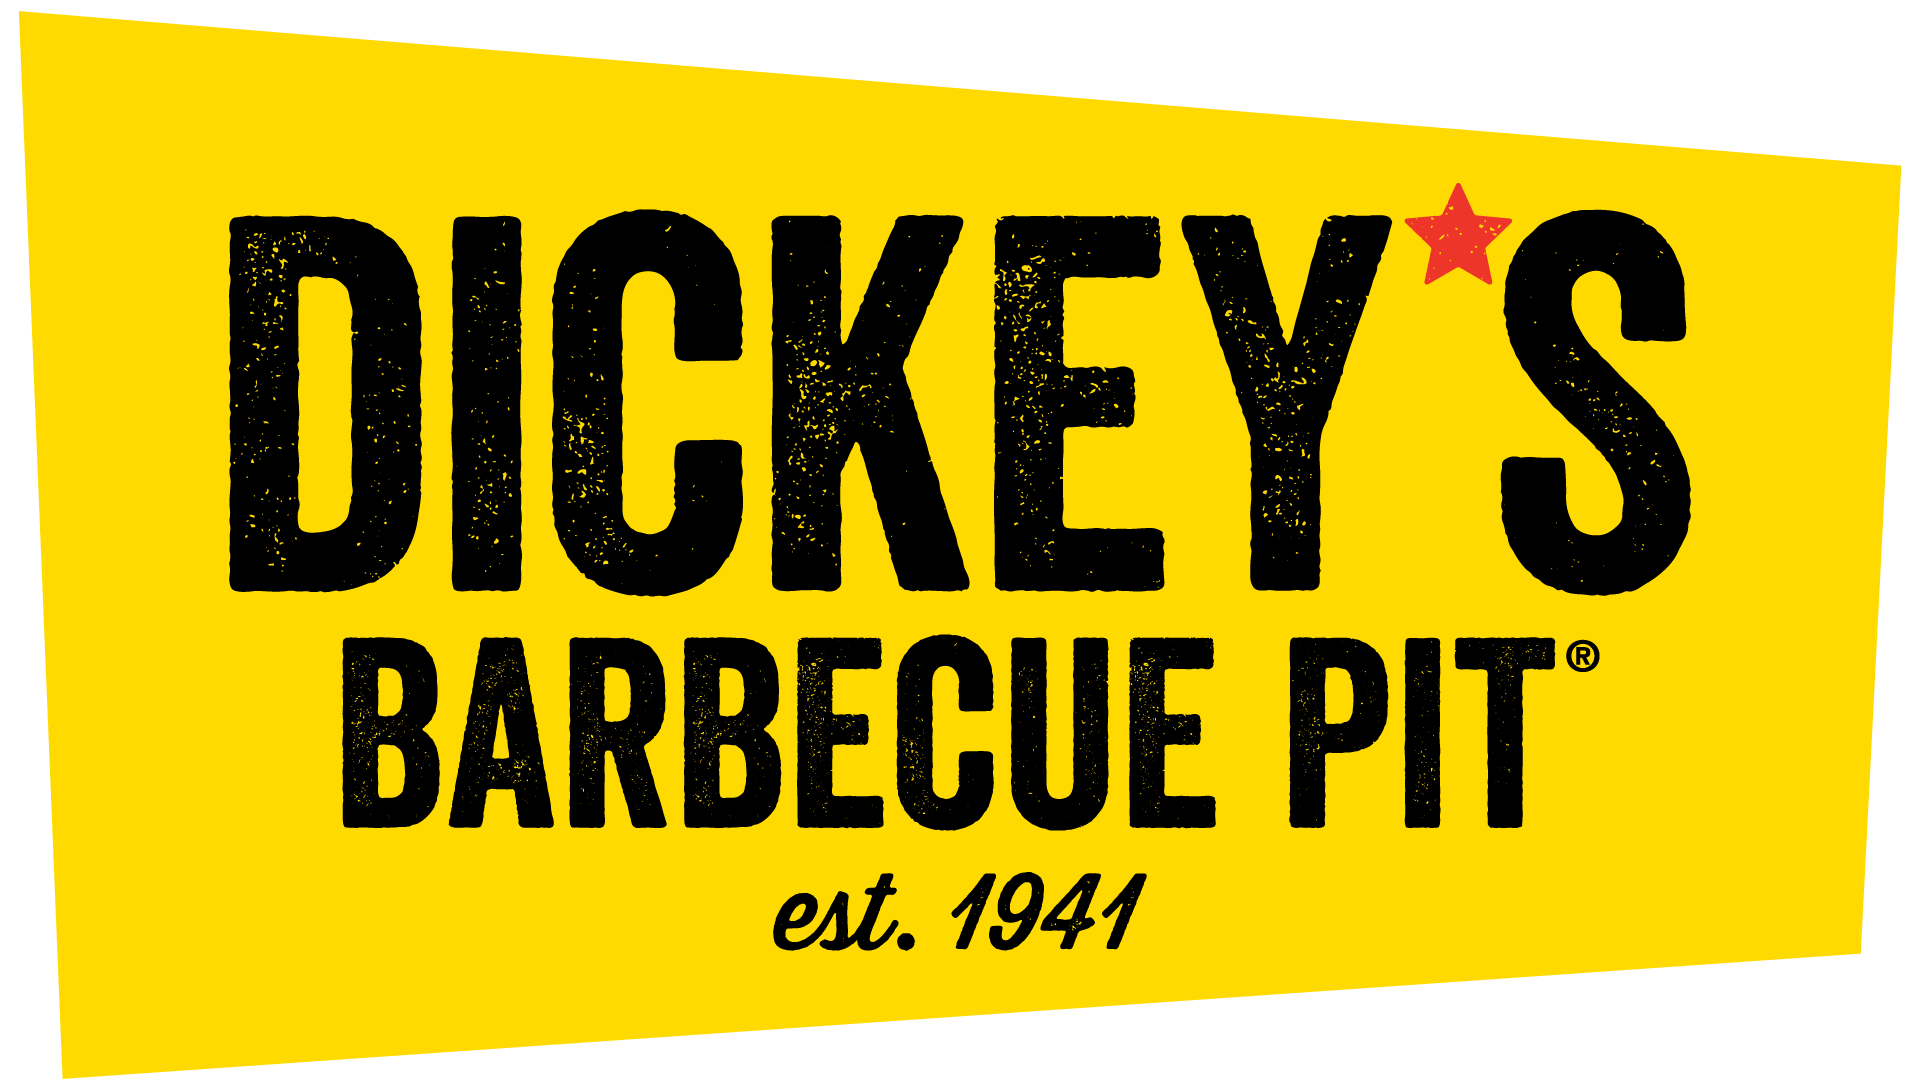 Dickey’s Named to 20